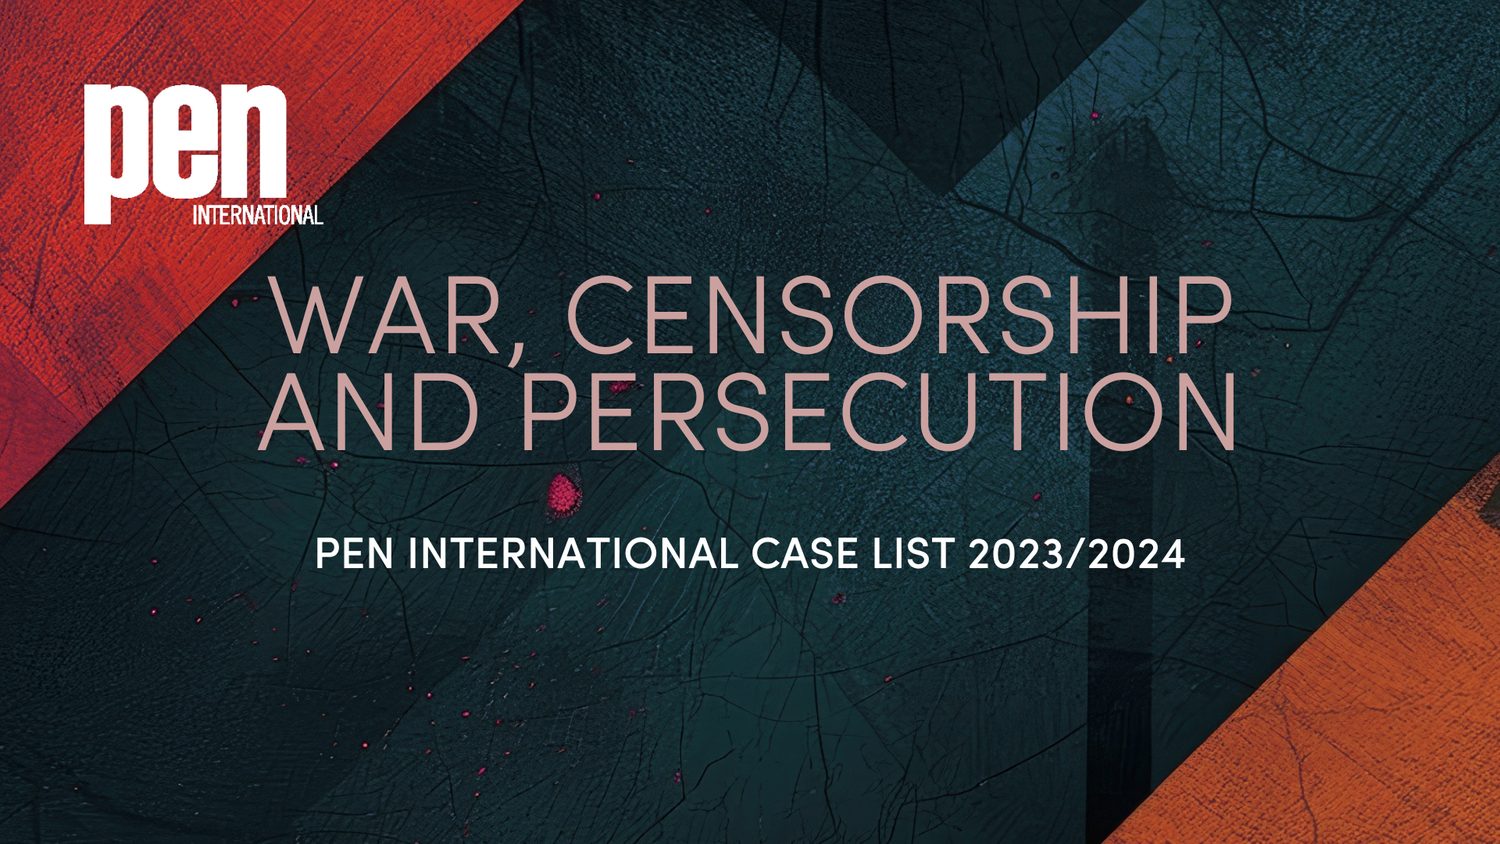 PEN International Case List 2023/2024: Unveiling the Persecution and Censorship of Writers Amid War